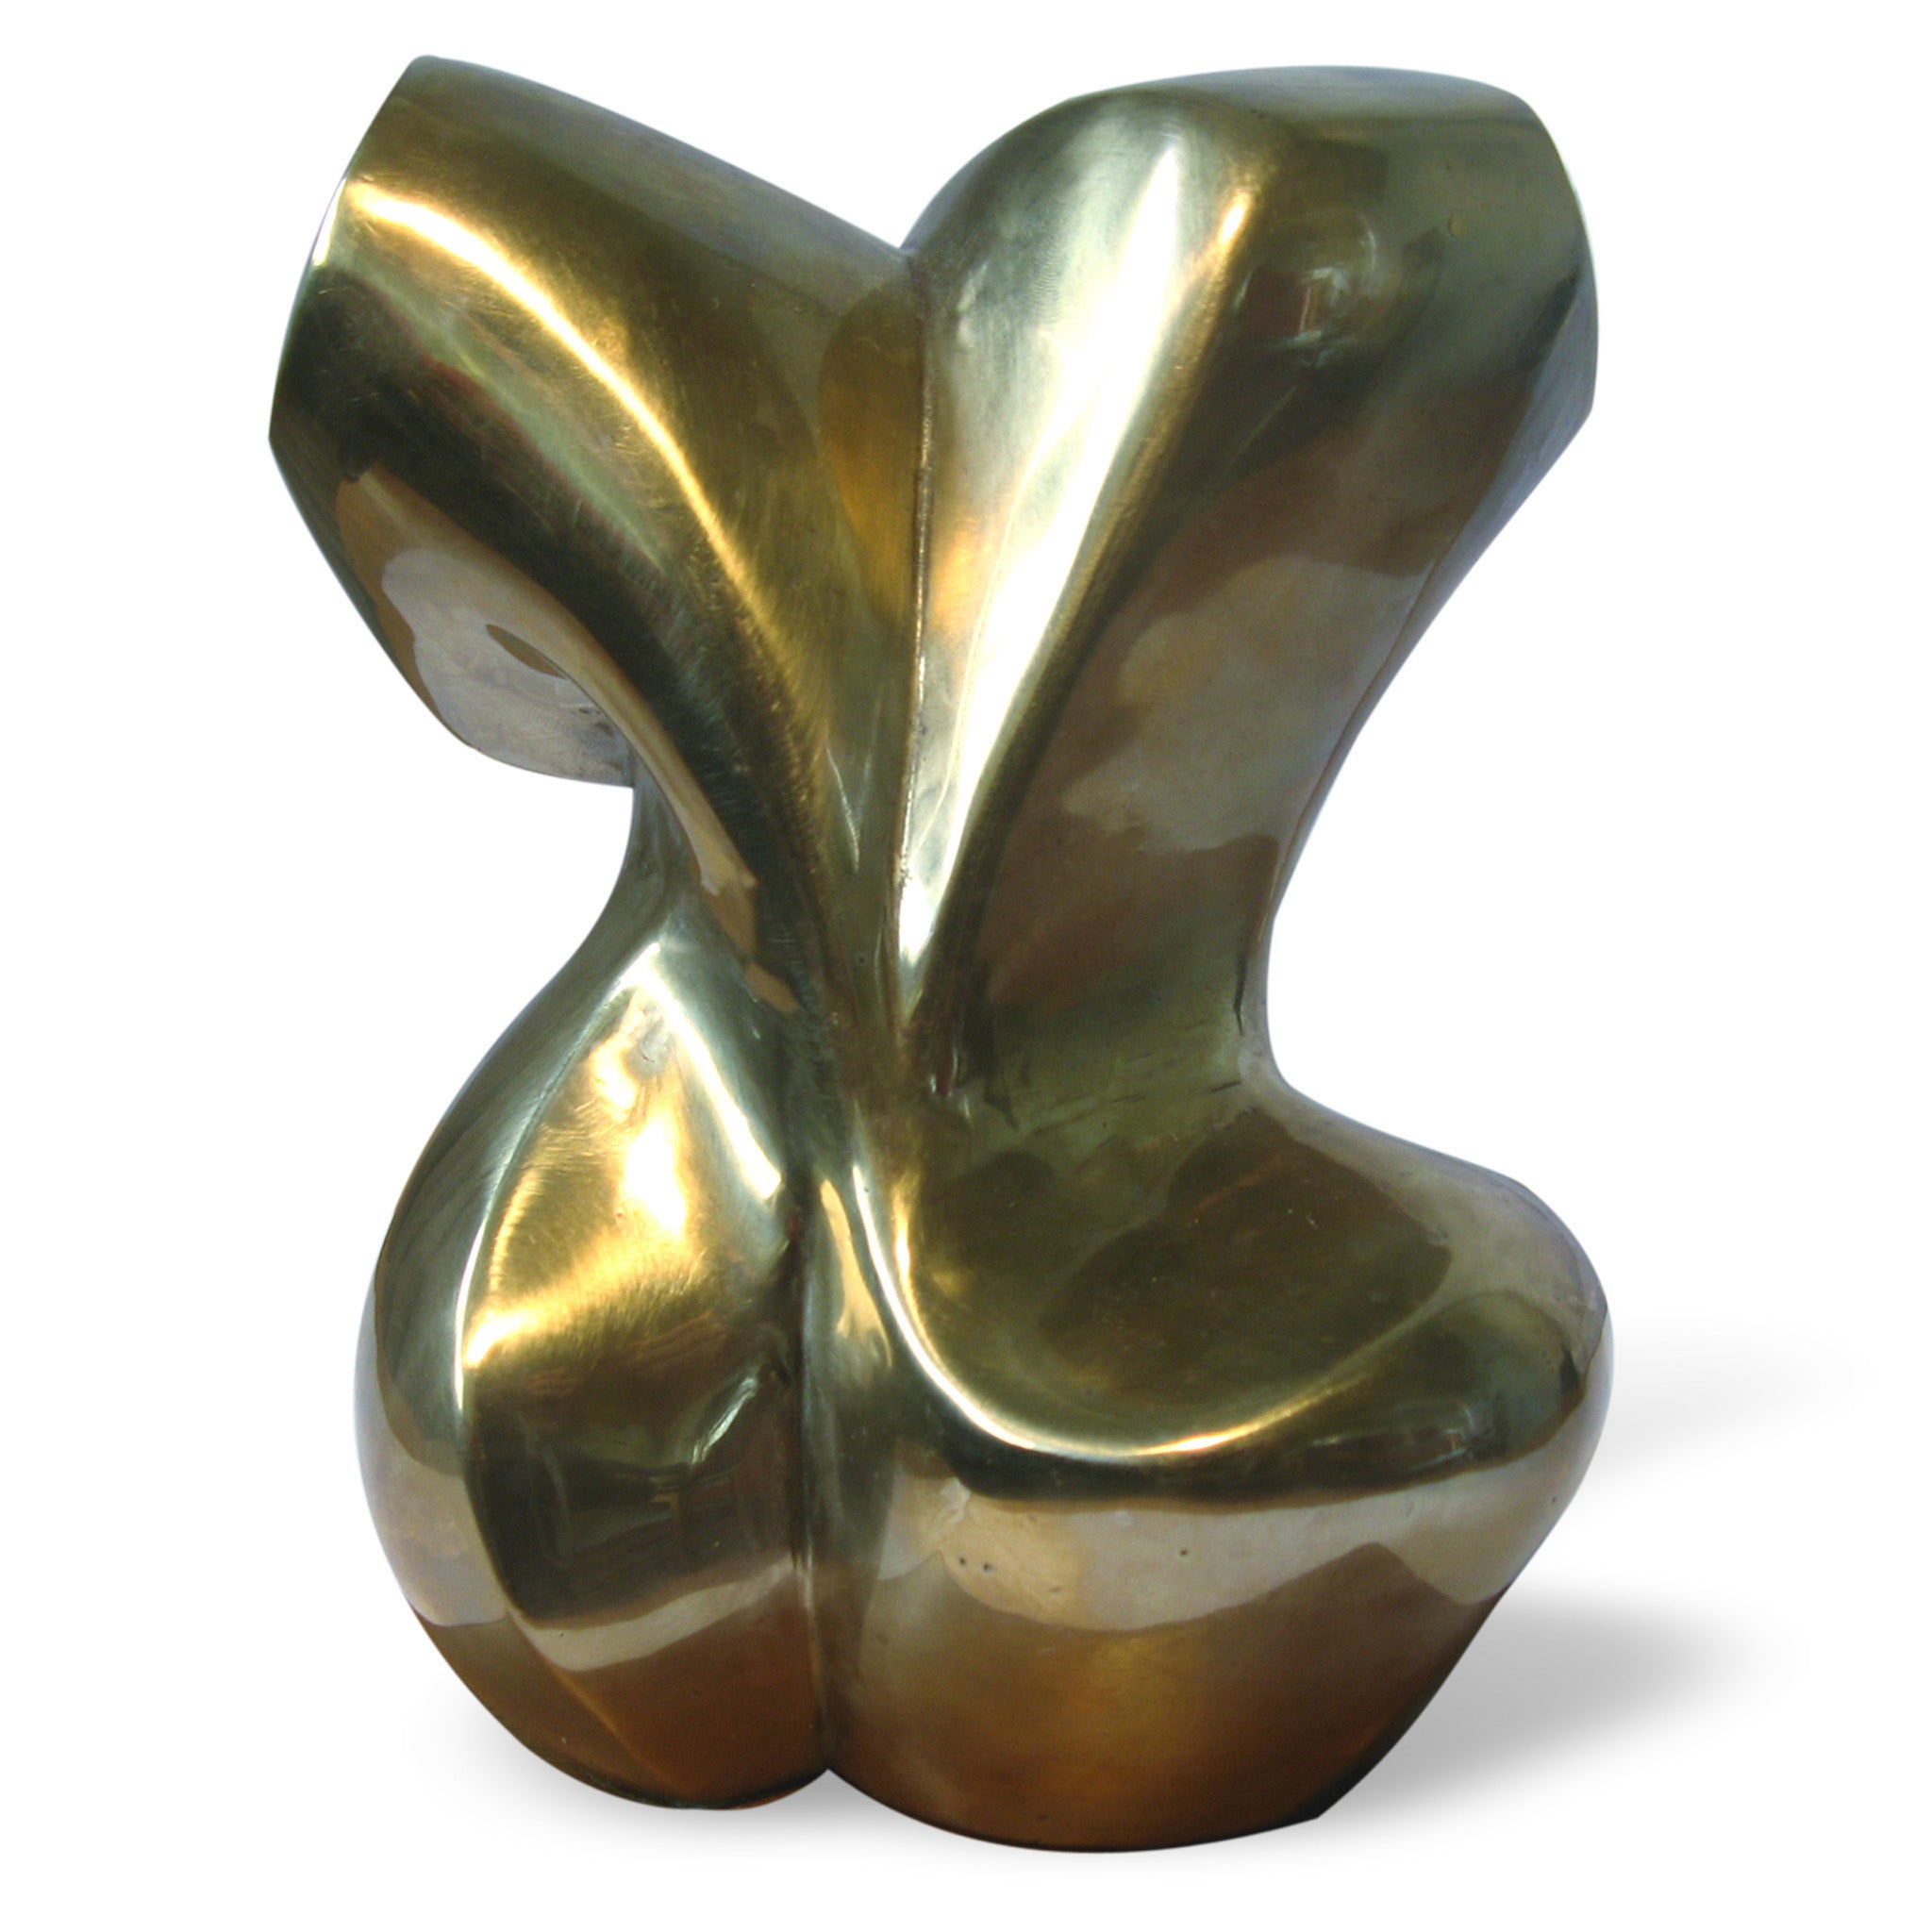 Abstract bronze sculpture for sale by Stephen Williams